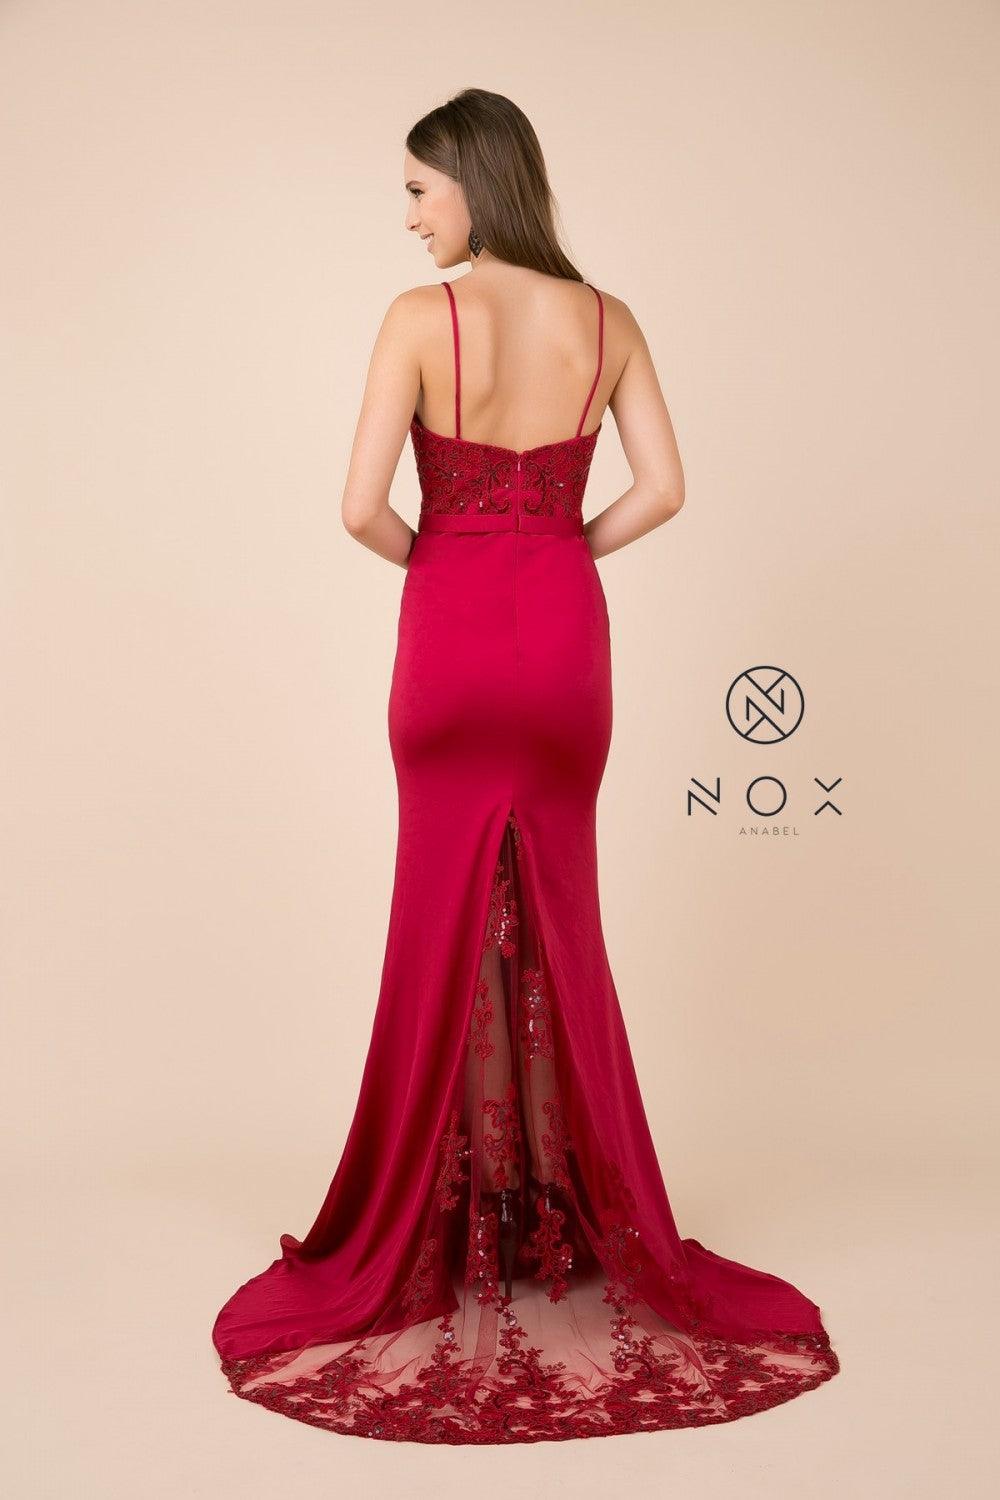 Prom Long Dress Fitted Evening Gown - The Dress Outlet Nox Anabel